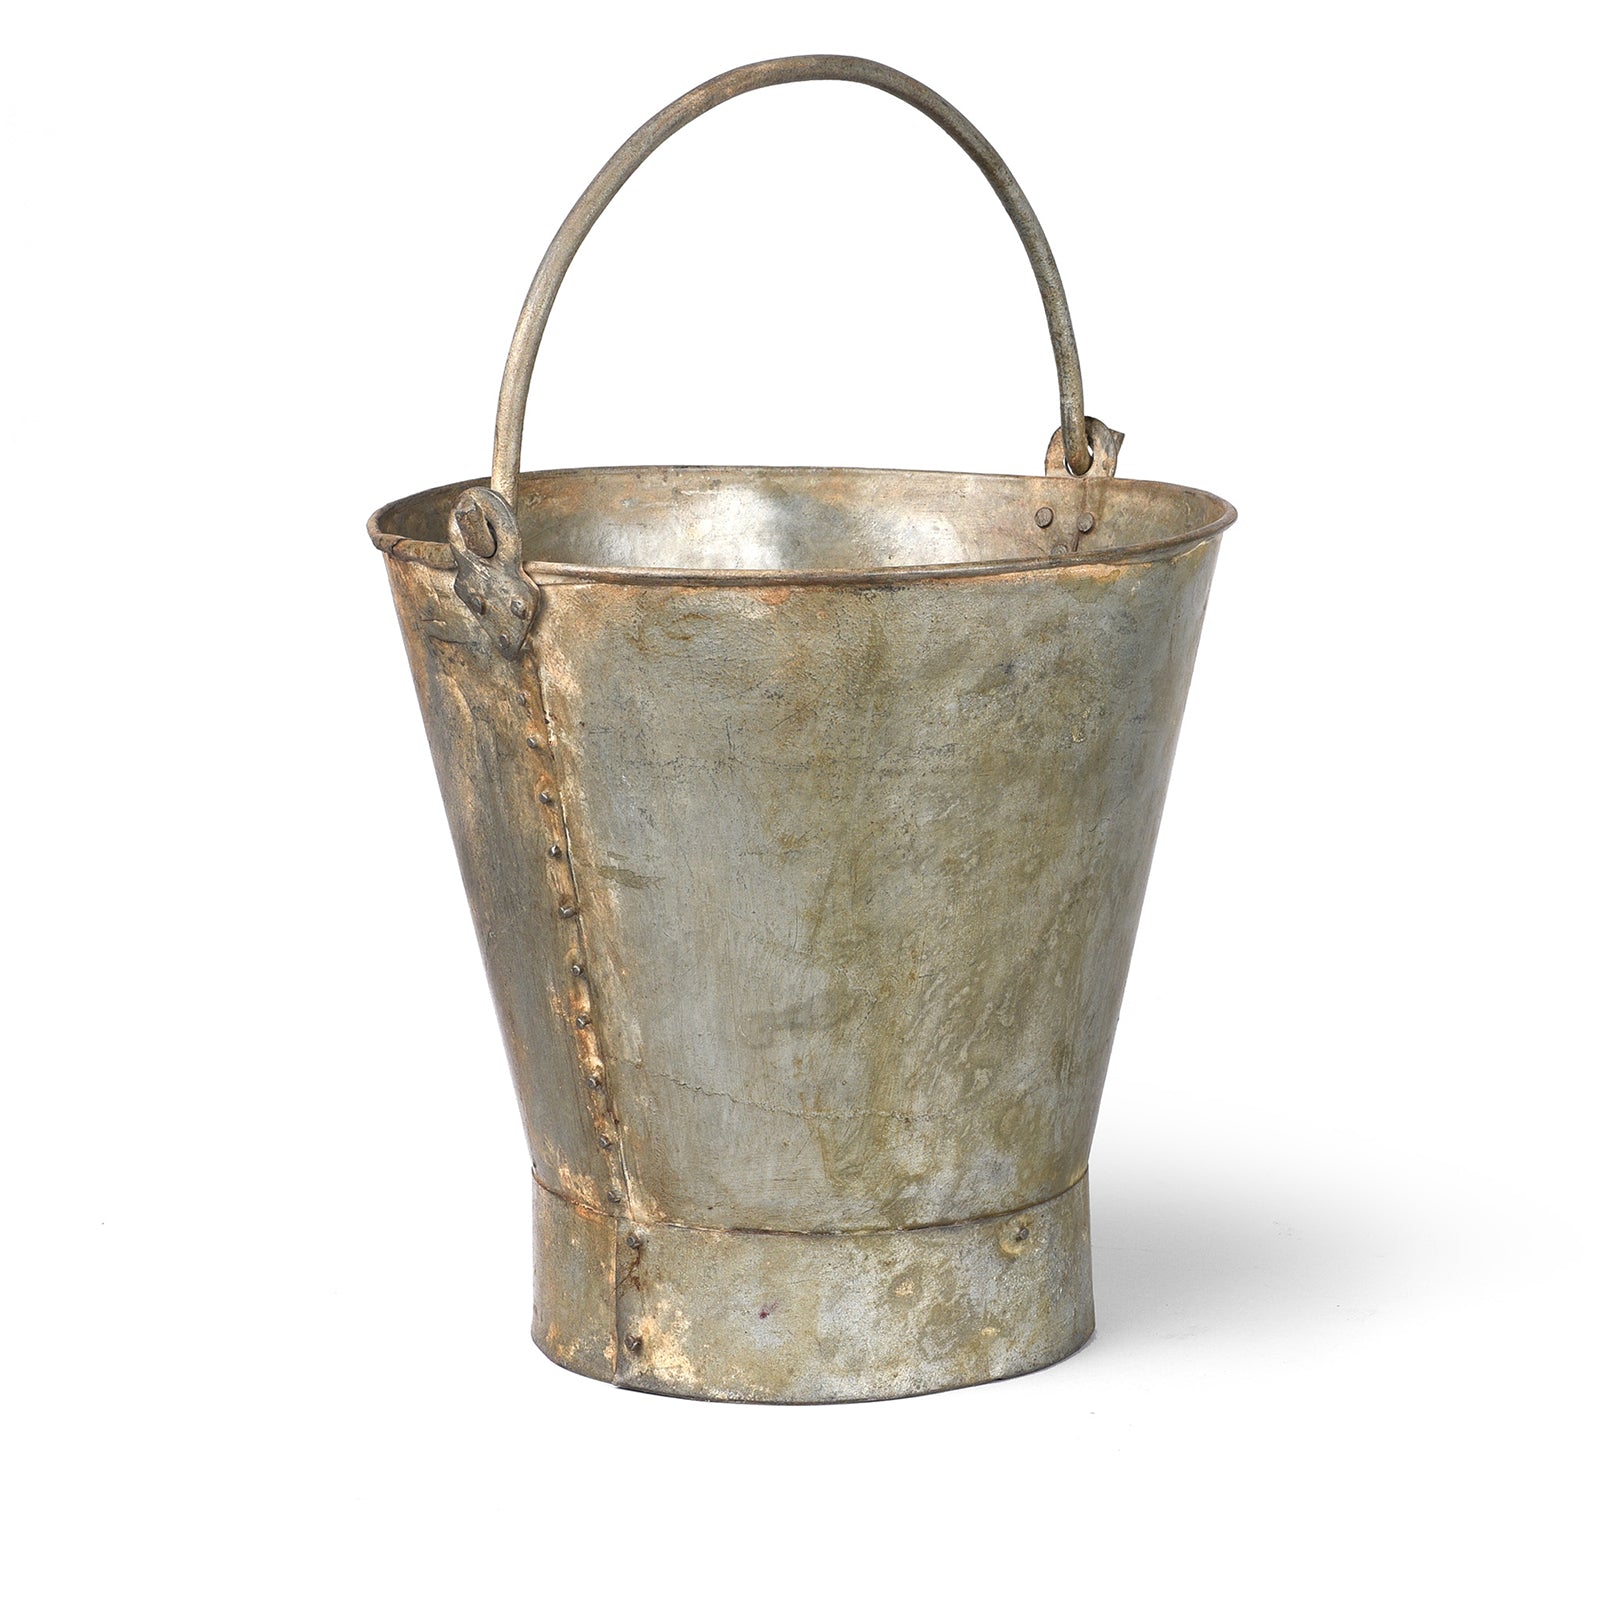 Vintage Galvanized Iron Bucket From Rajasthan For a planter or bin | Indigo Antiques